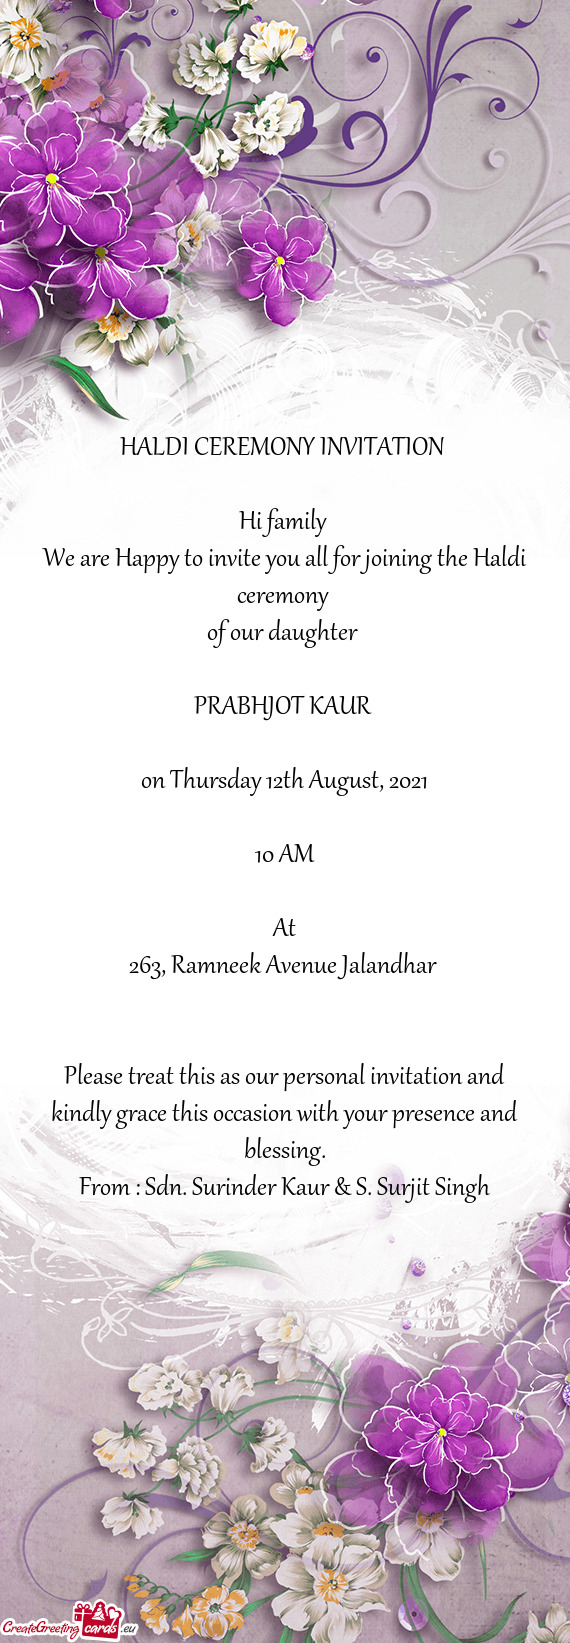 We are Happy to invite you all for joining the Haldi ceremony